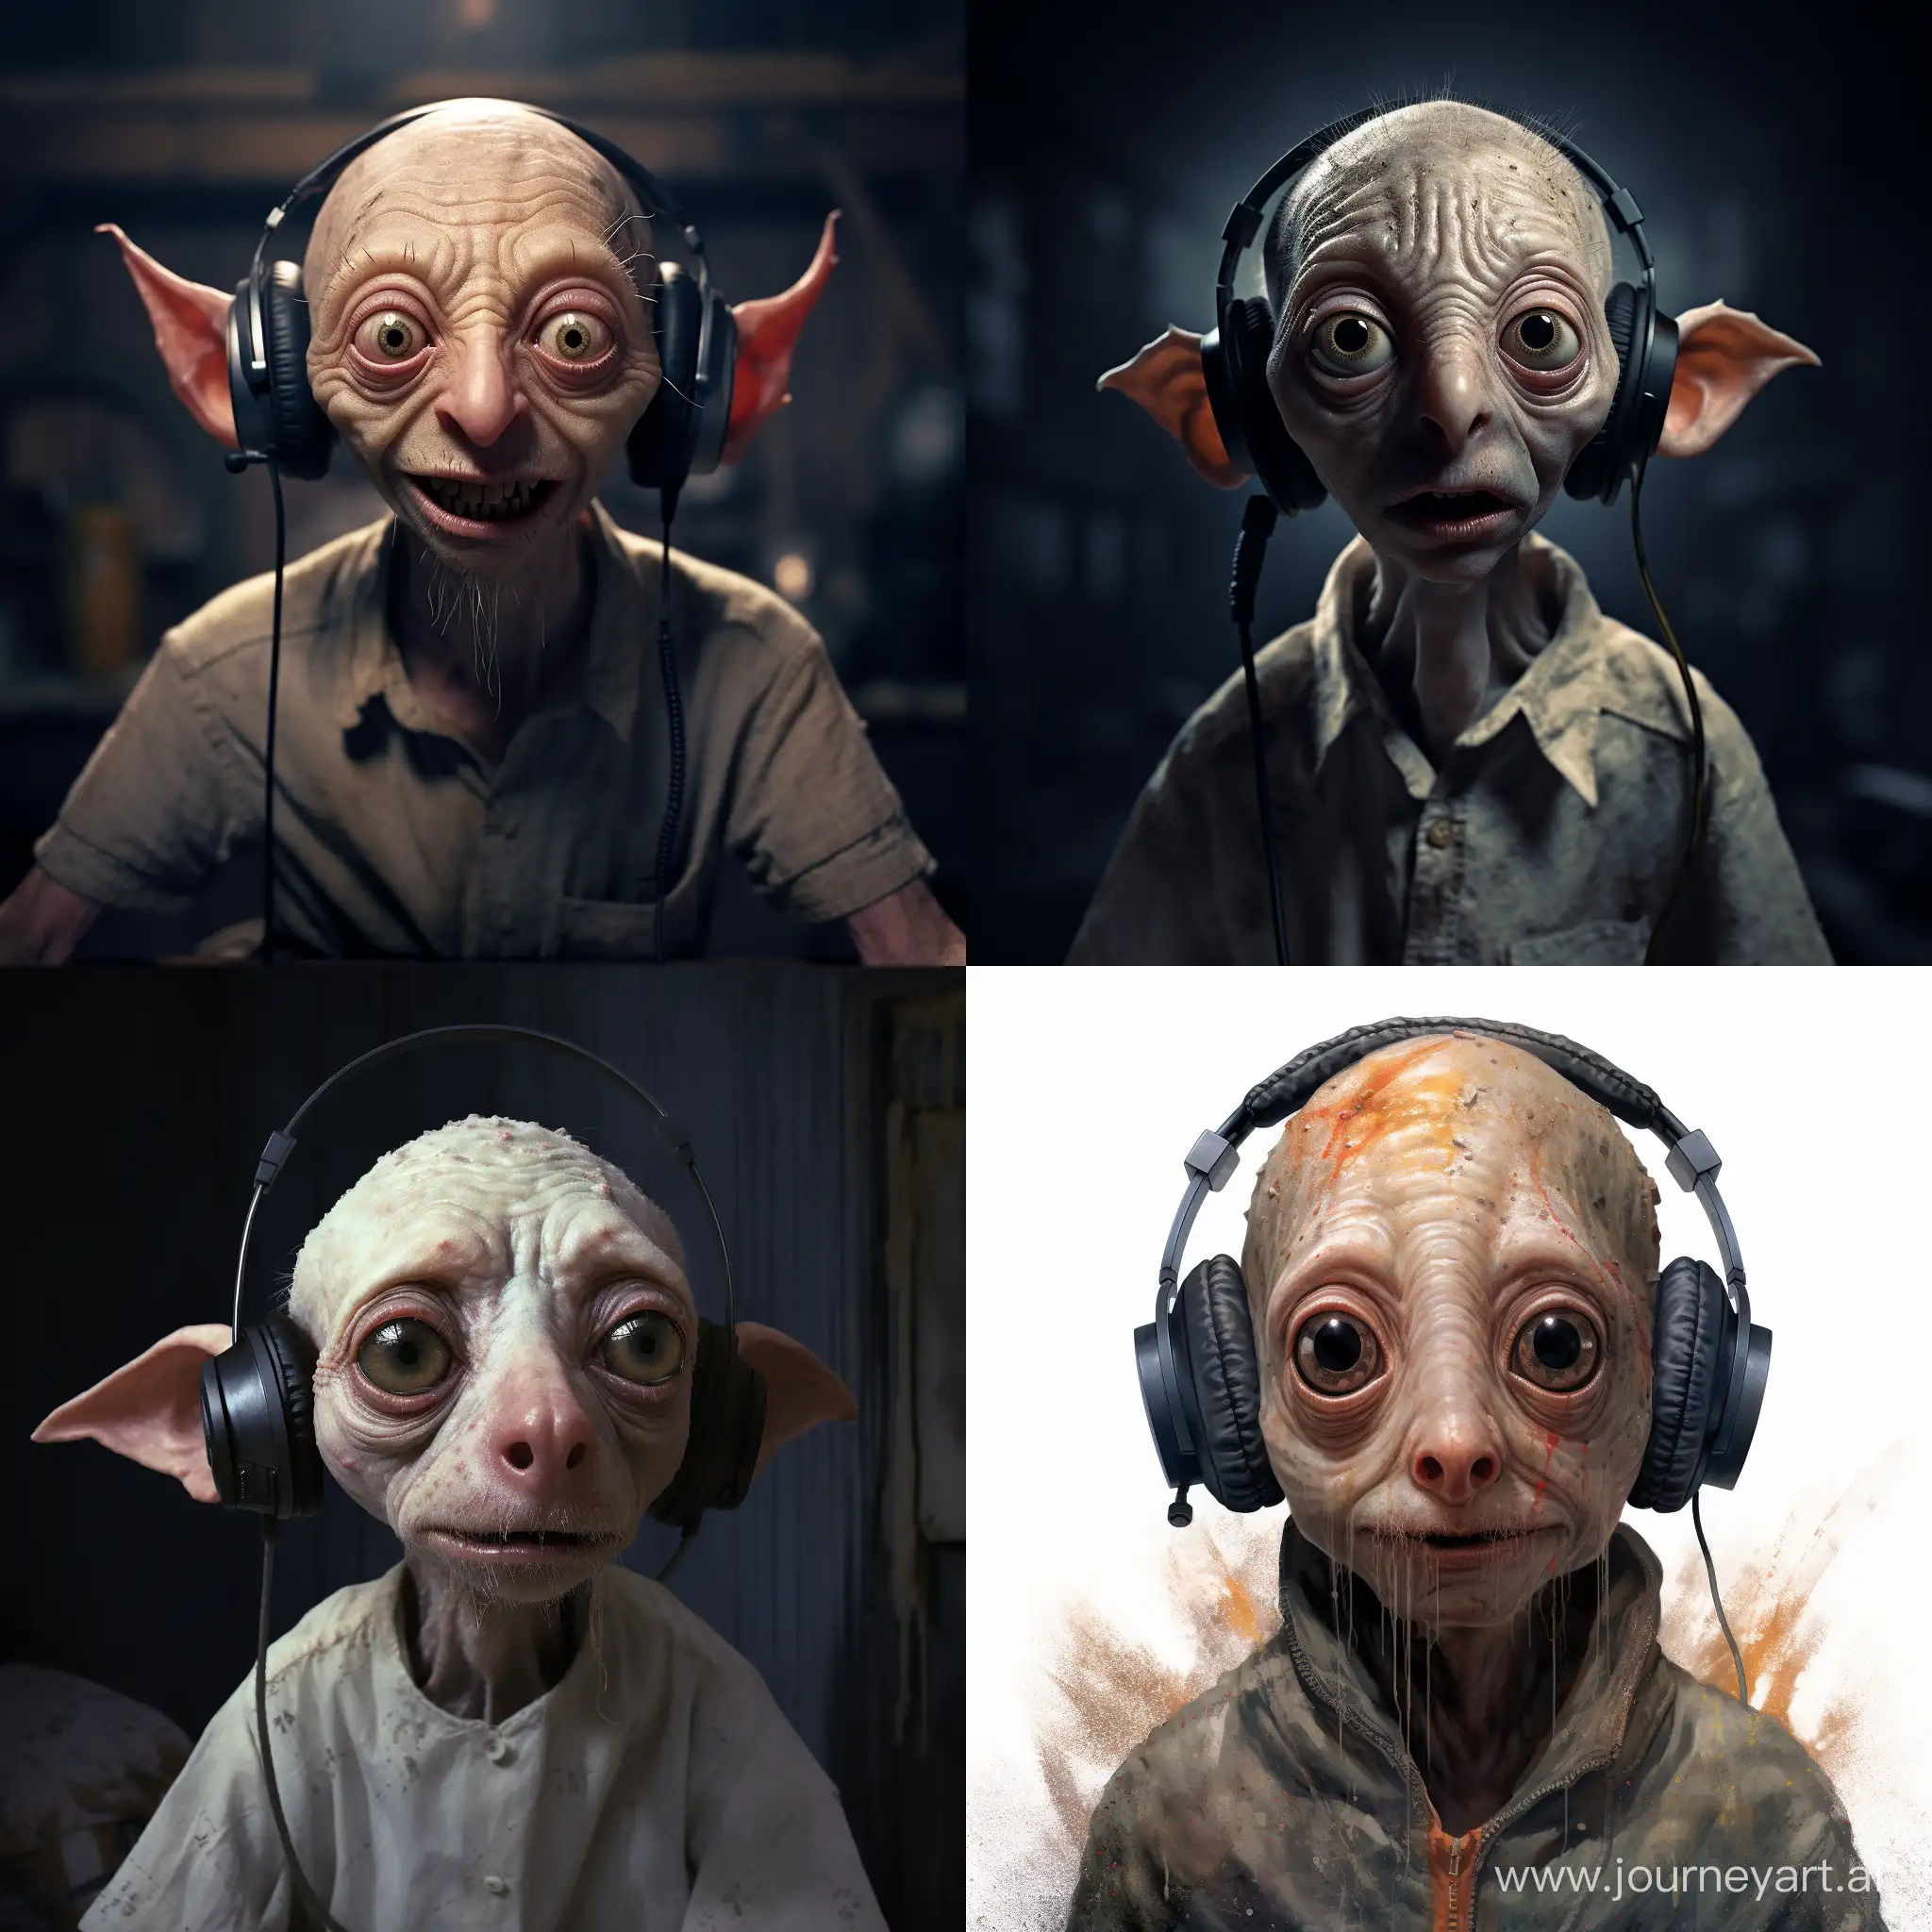 art dobby from harry potter with headphones with microphone